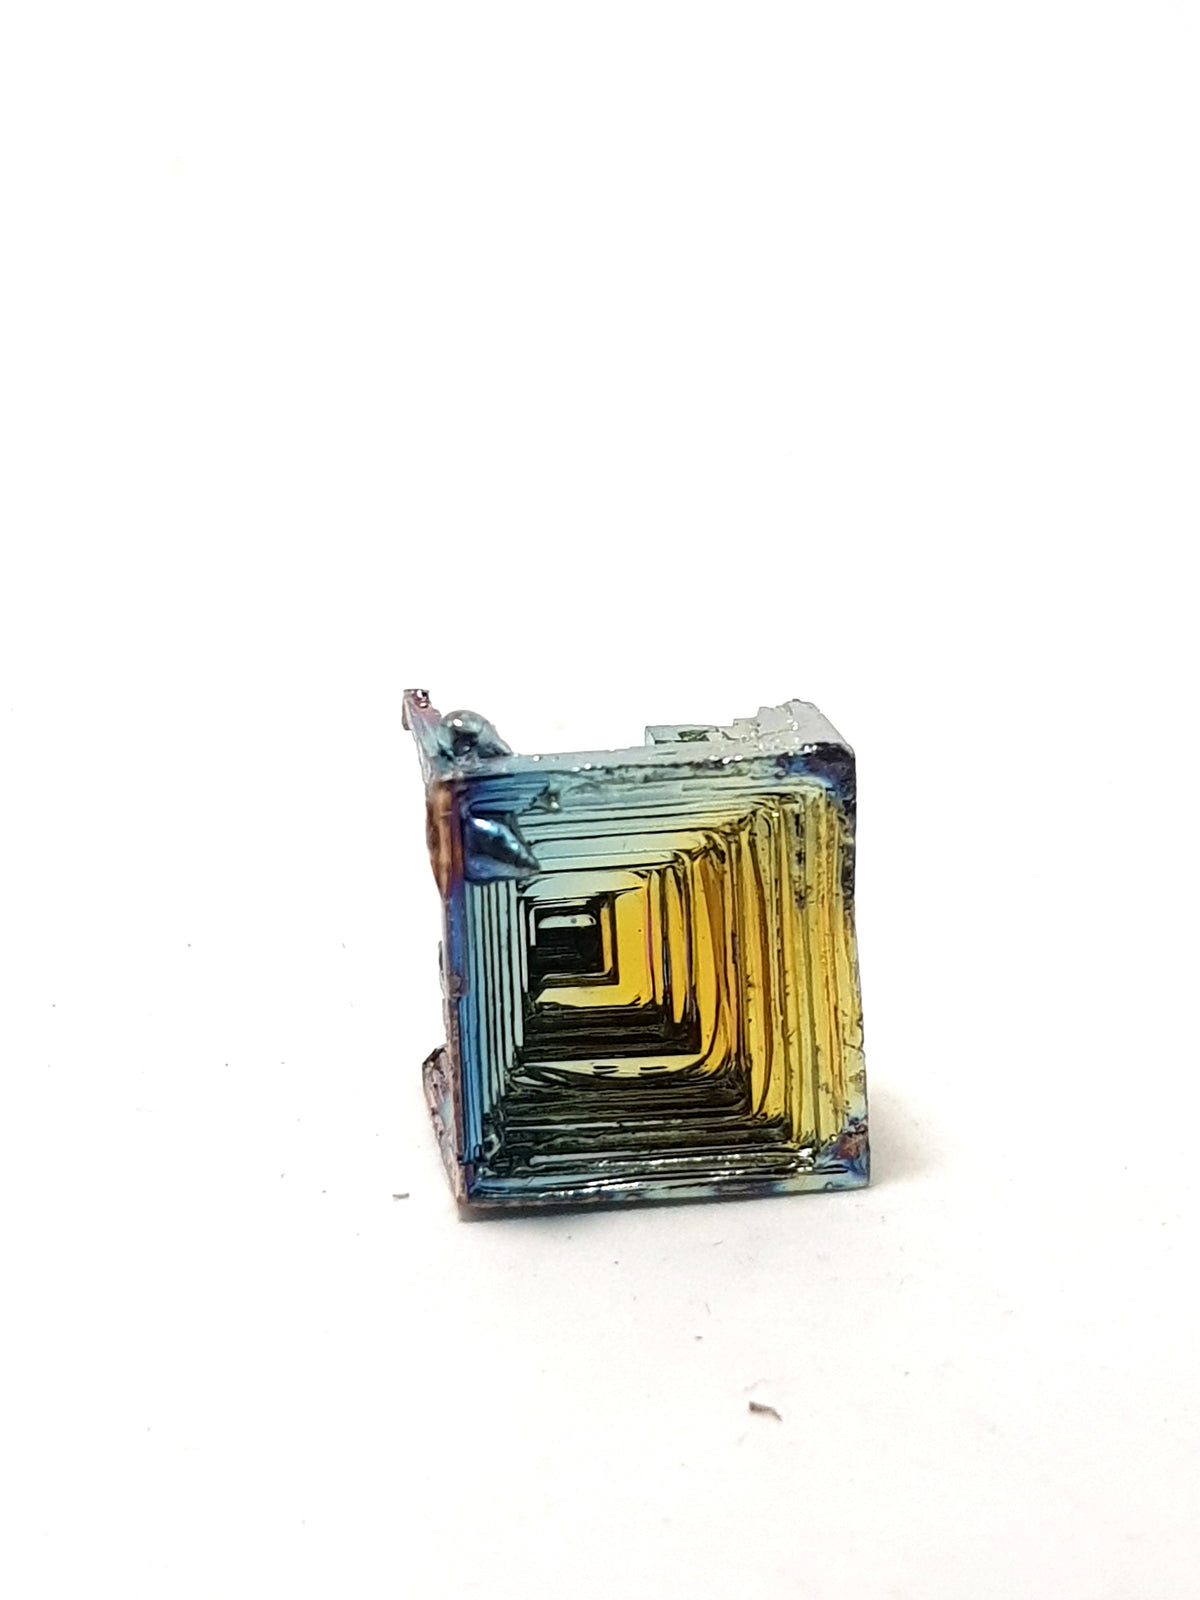 bismuth crystal. square base, shows hoping and golden/blue iridescence